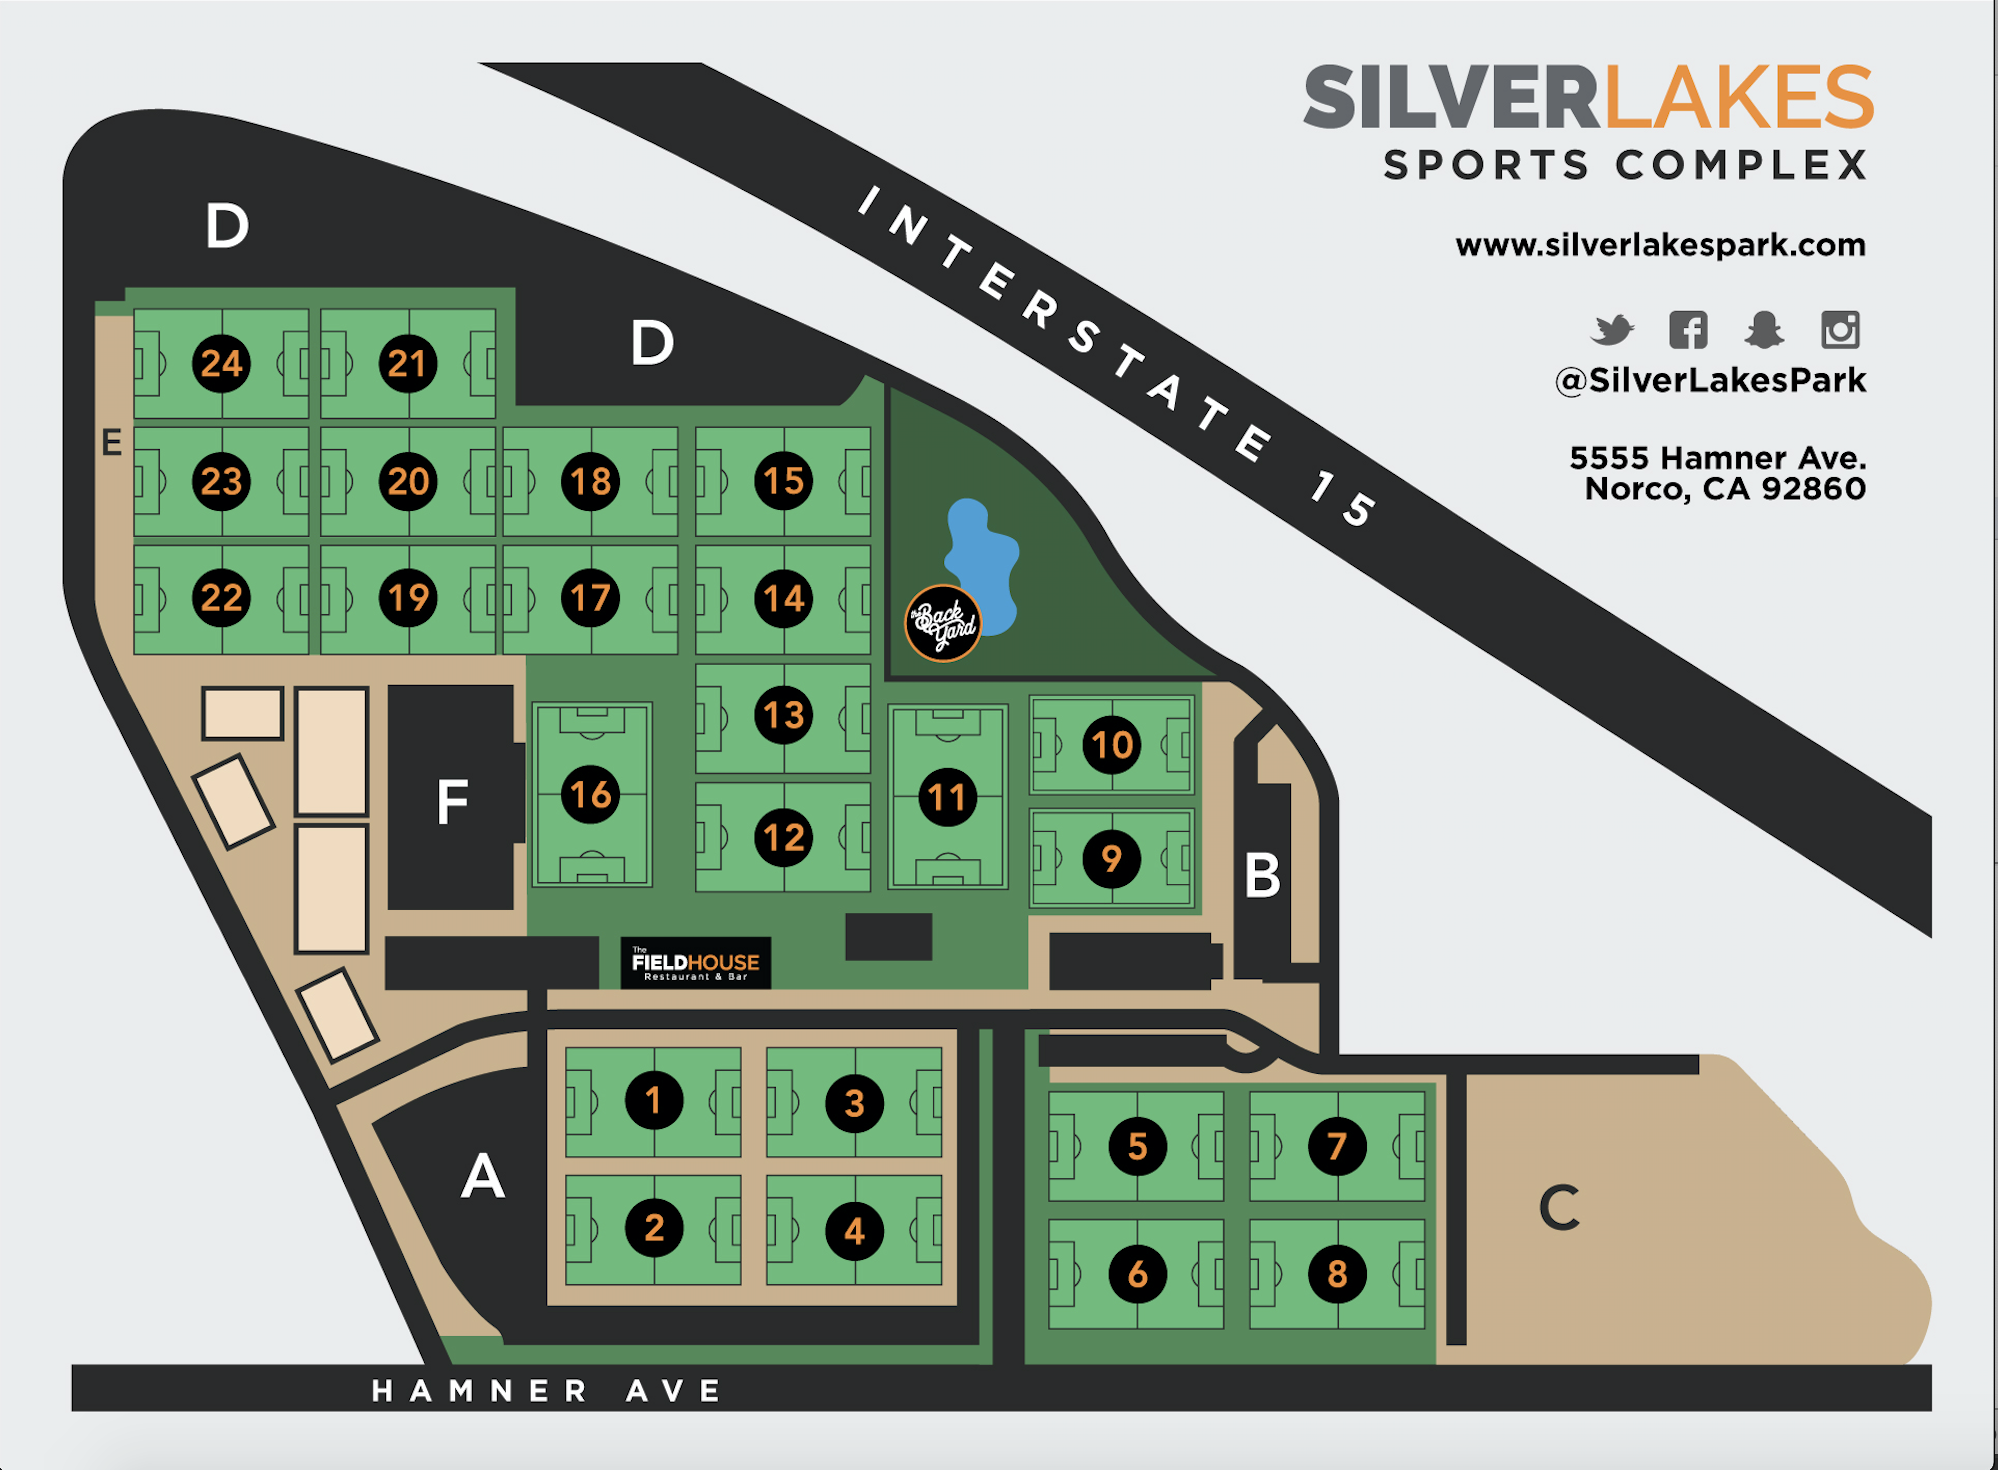 Silverlakes Sports Complex Map in Norco CA